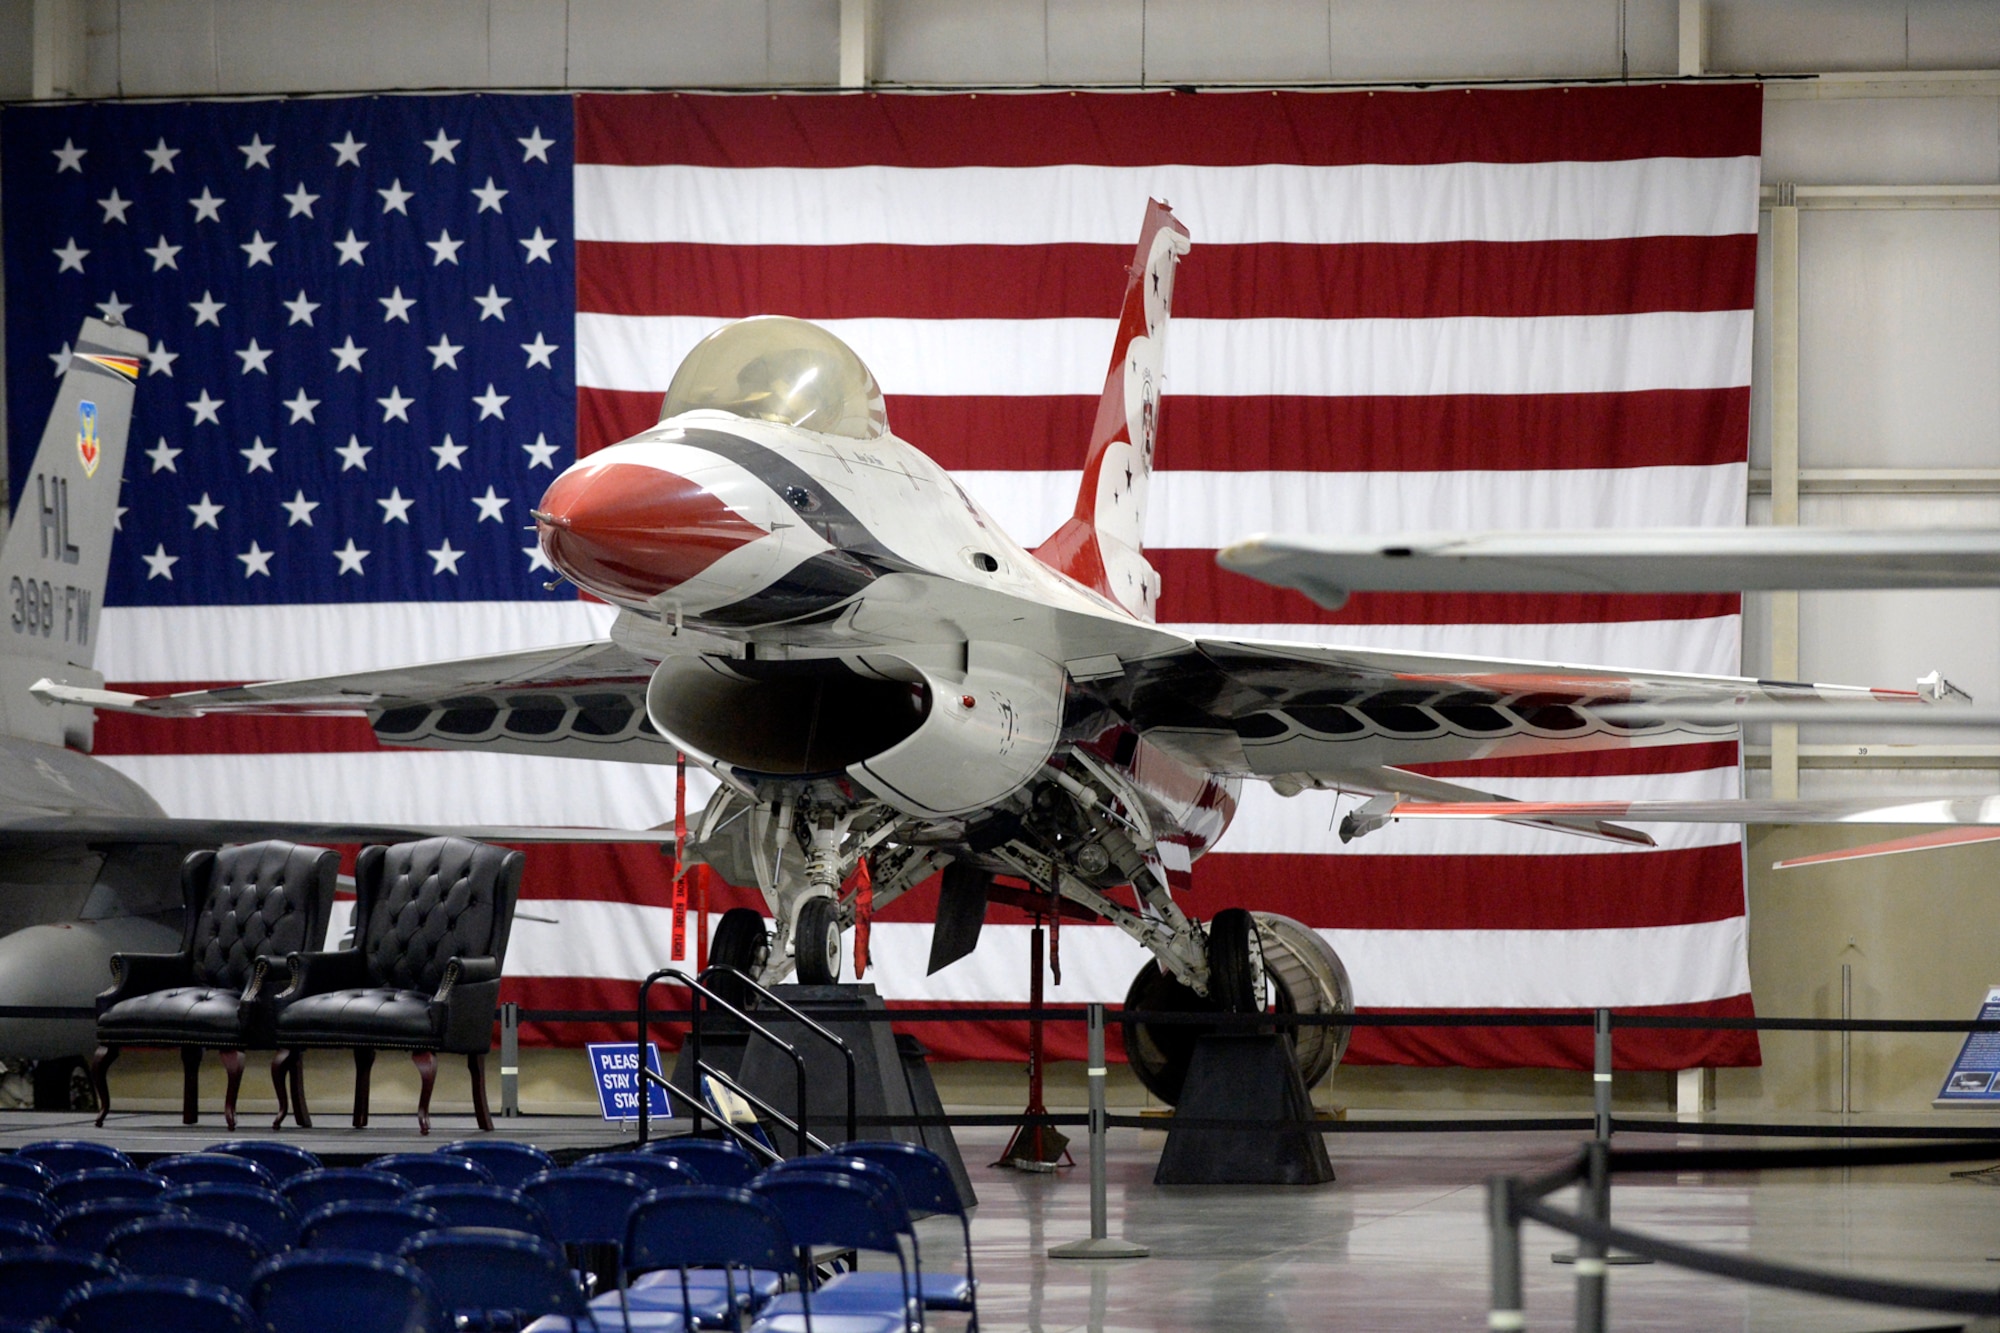 A Thunderbird F-16A Fighting Falcon flown by the U.S. Air Force Thunderbirds aerial demonstration team from 1983-1992 is on display June 1, 2018, at the east end of the Hill Aerospace Museum’s Fighter Gallery at Hill Air Force Base, Utah. The aircraft restoration took several months to complete and will be formally unveiled during a private ceremony in conjunction with the Warriors Over the Wasatch Air and Space Show June 23-24 at Hill. (U.S. Air Force photo by Todd Cromar)